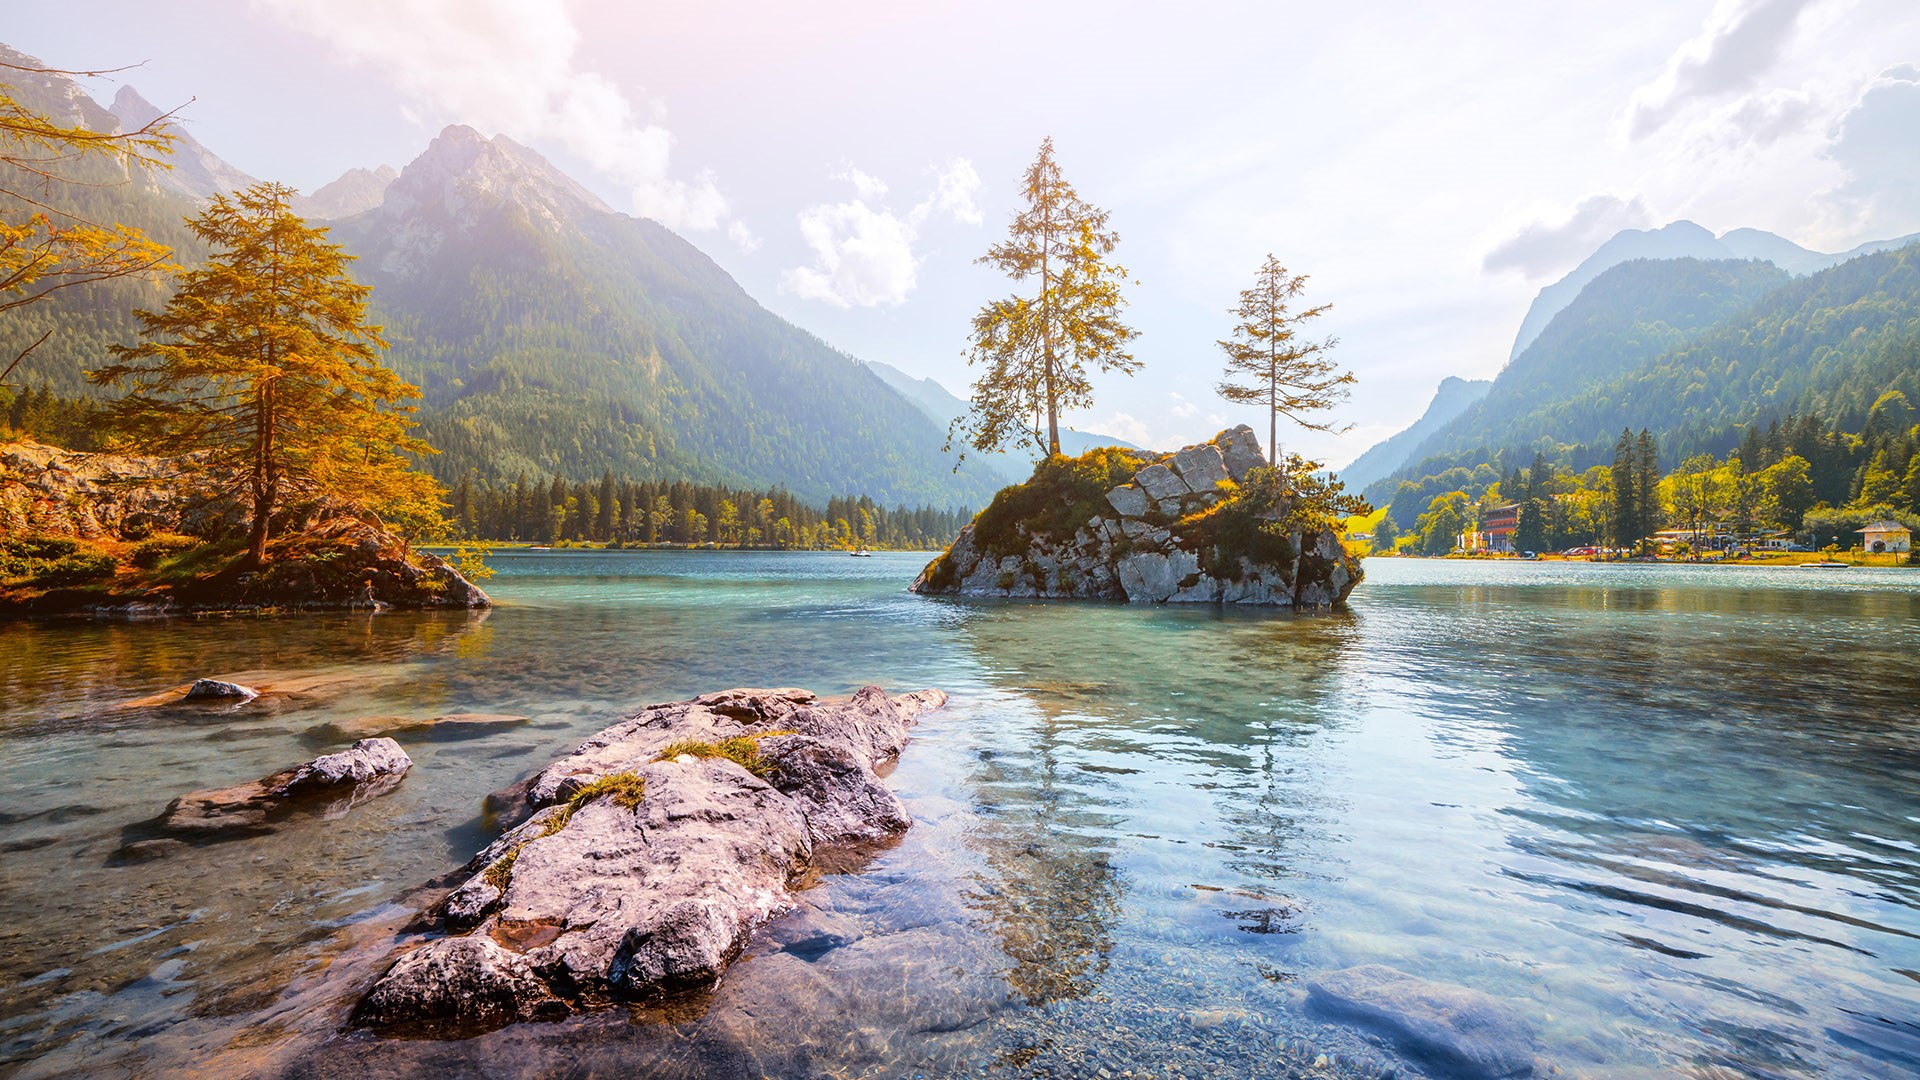 General 1920x1080 forest nature landscape summer mountains valley rocks water ripples Germany Lake Hintersee